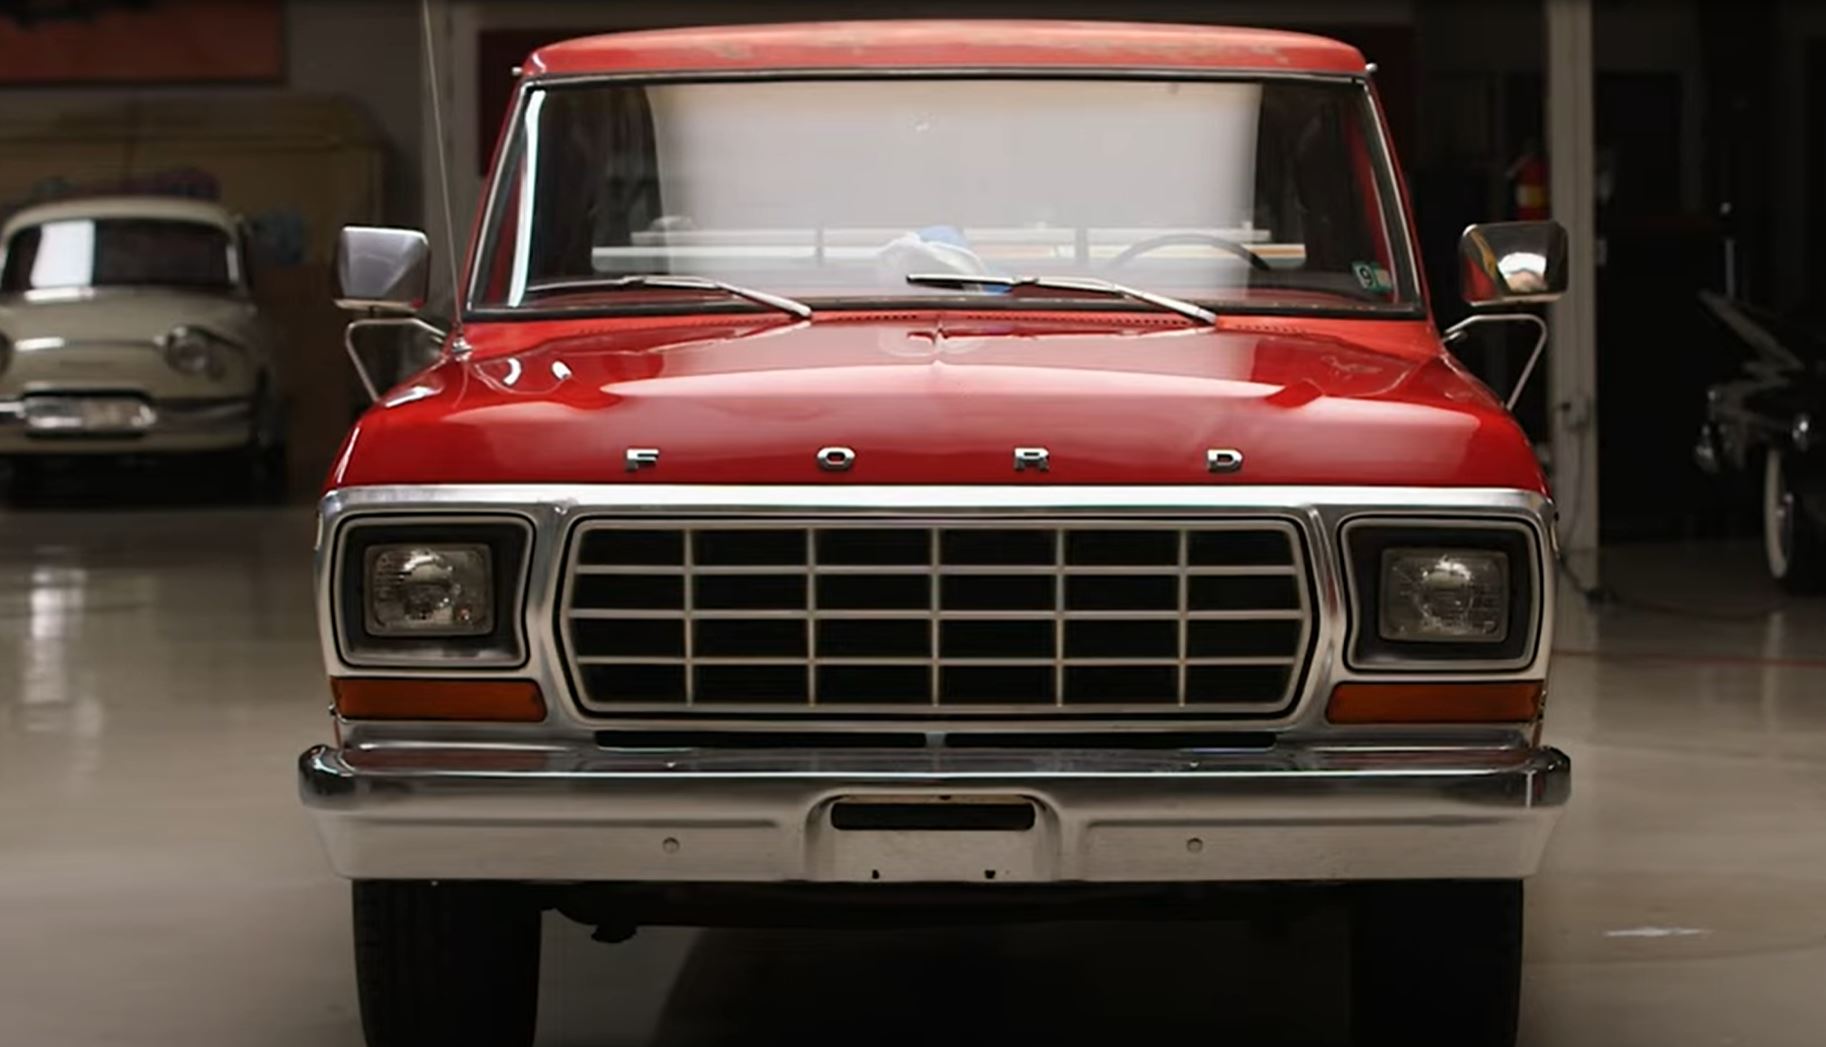 The front of a red 1979 Ford F-150 Custom pickup truck